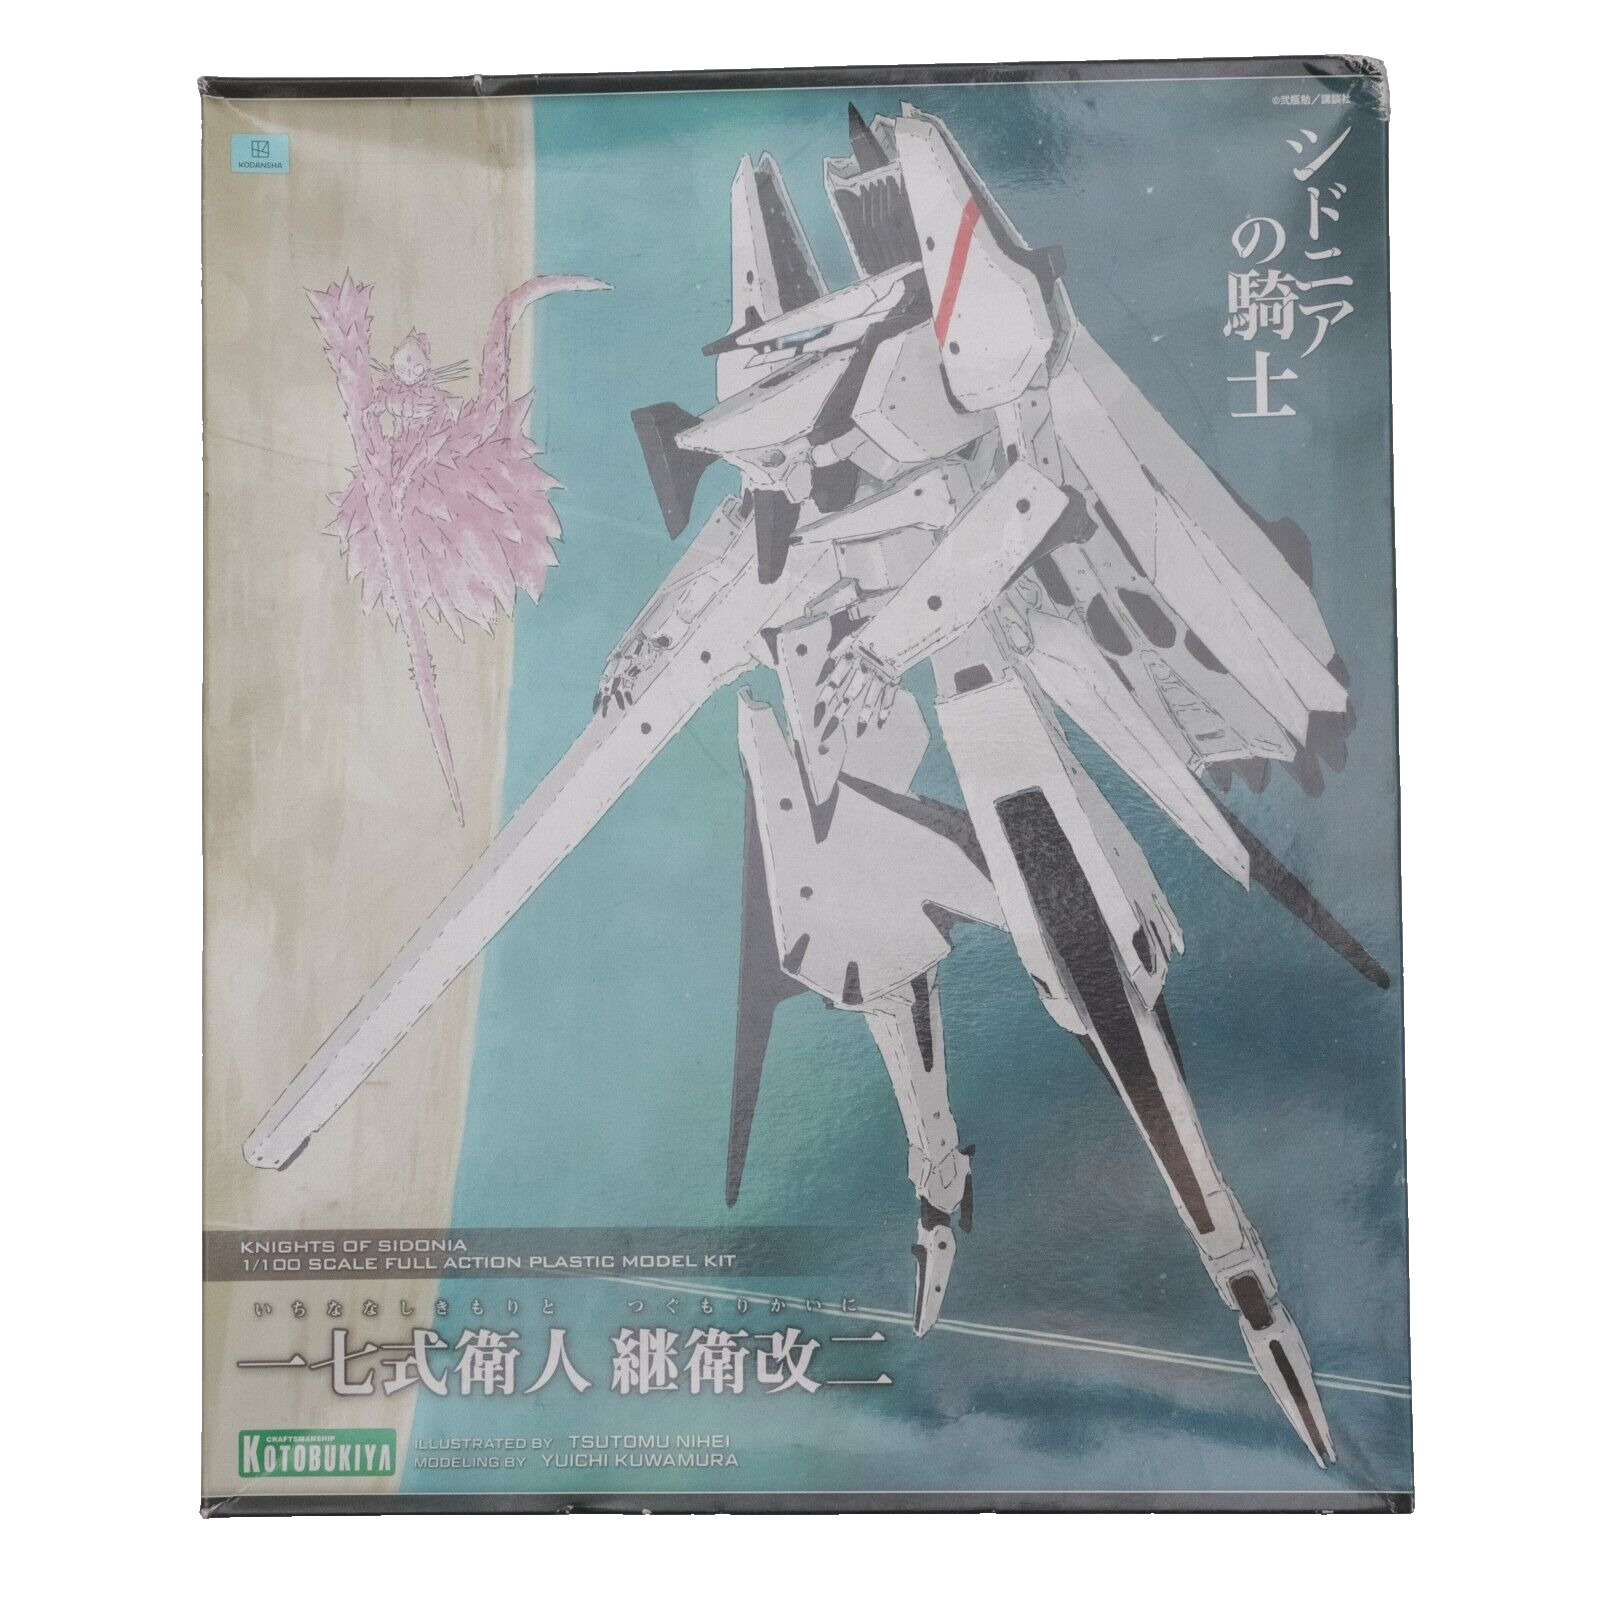 Knights of Sidonia 1/100 Scale Full Action Plastic Model Kit Open Box New